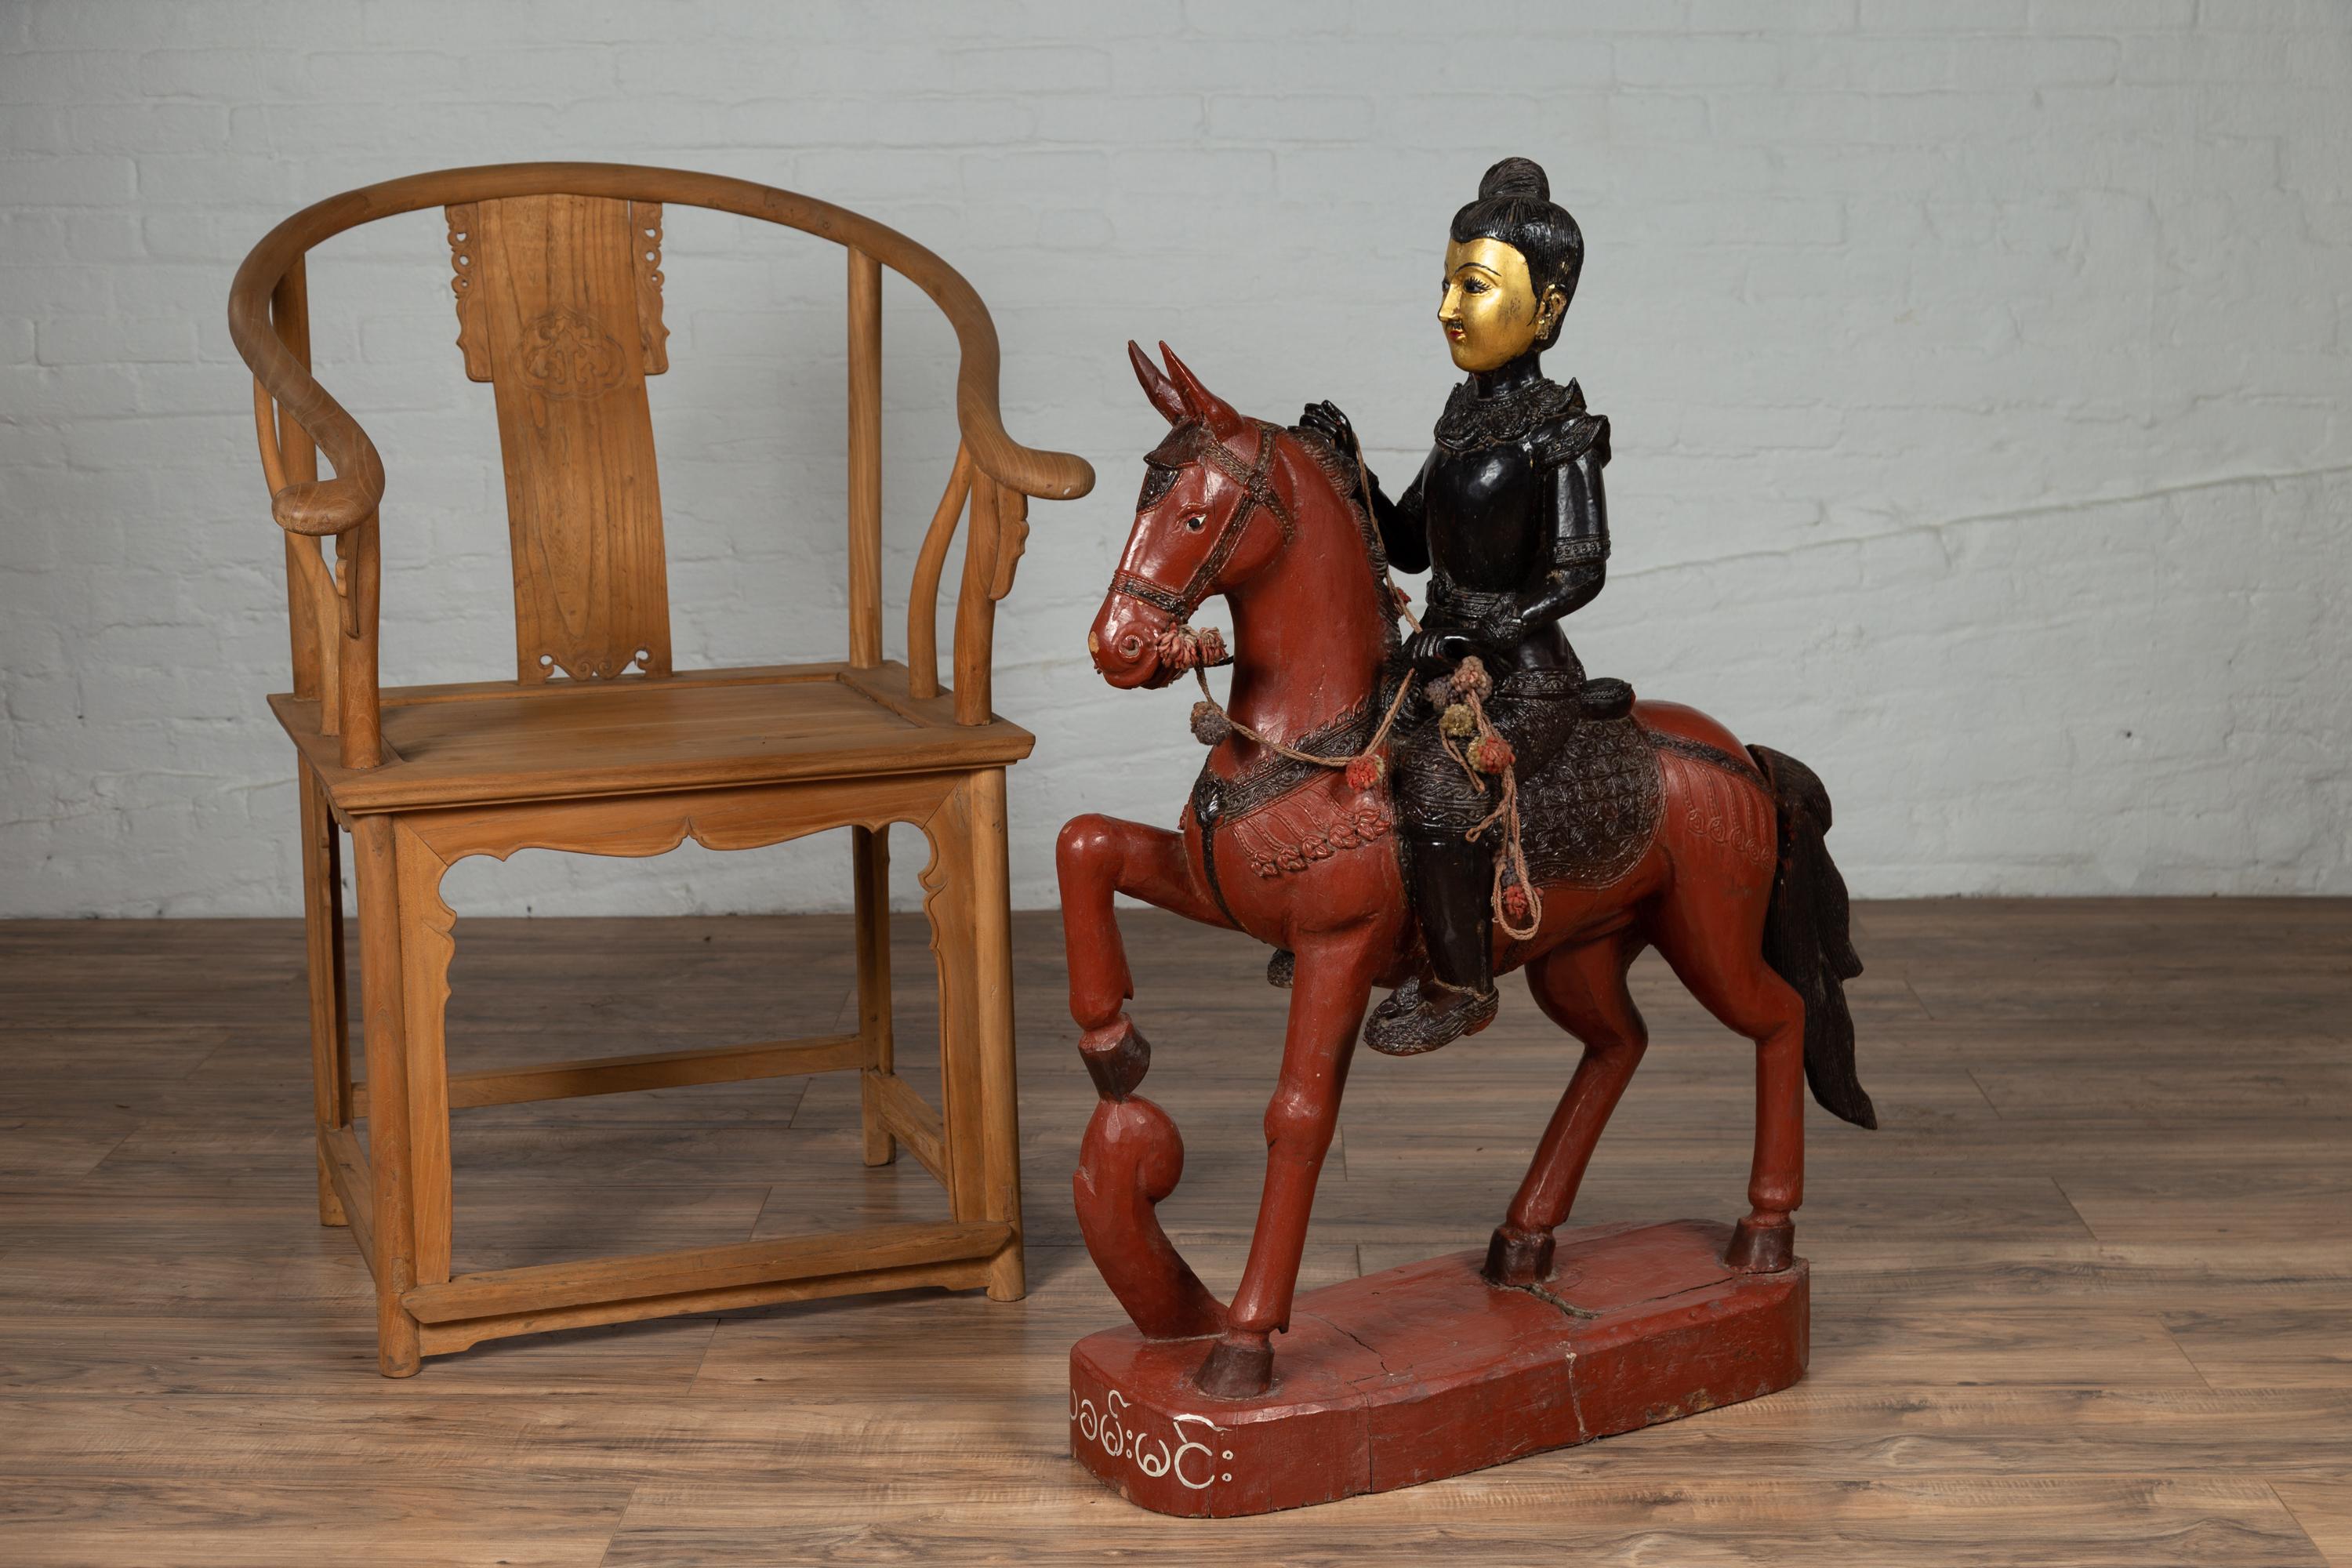 A vintage Burmese polychrome wooden statue from the mid-20th century, depicting a warrior on a horse. Born in Burma during the mid-century period, this striking carved wooden statue features a warrior sitting proudly on his brown horse. The